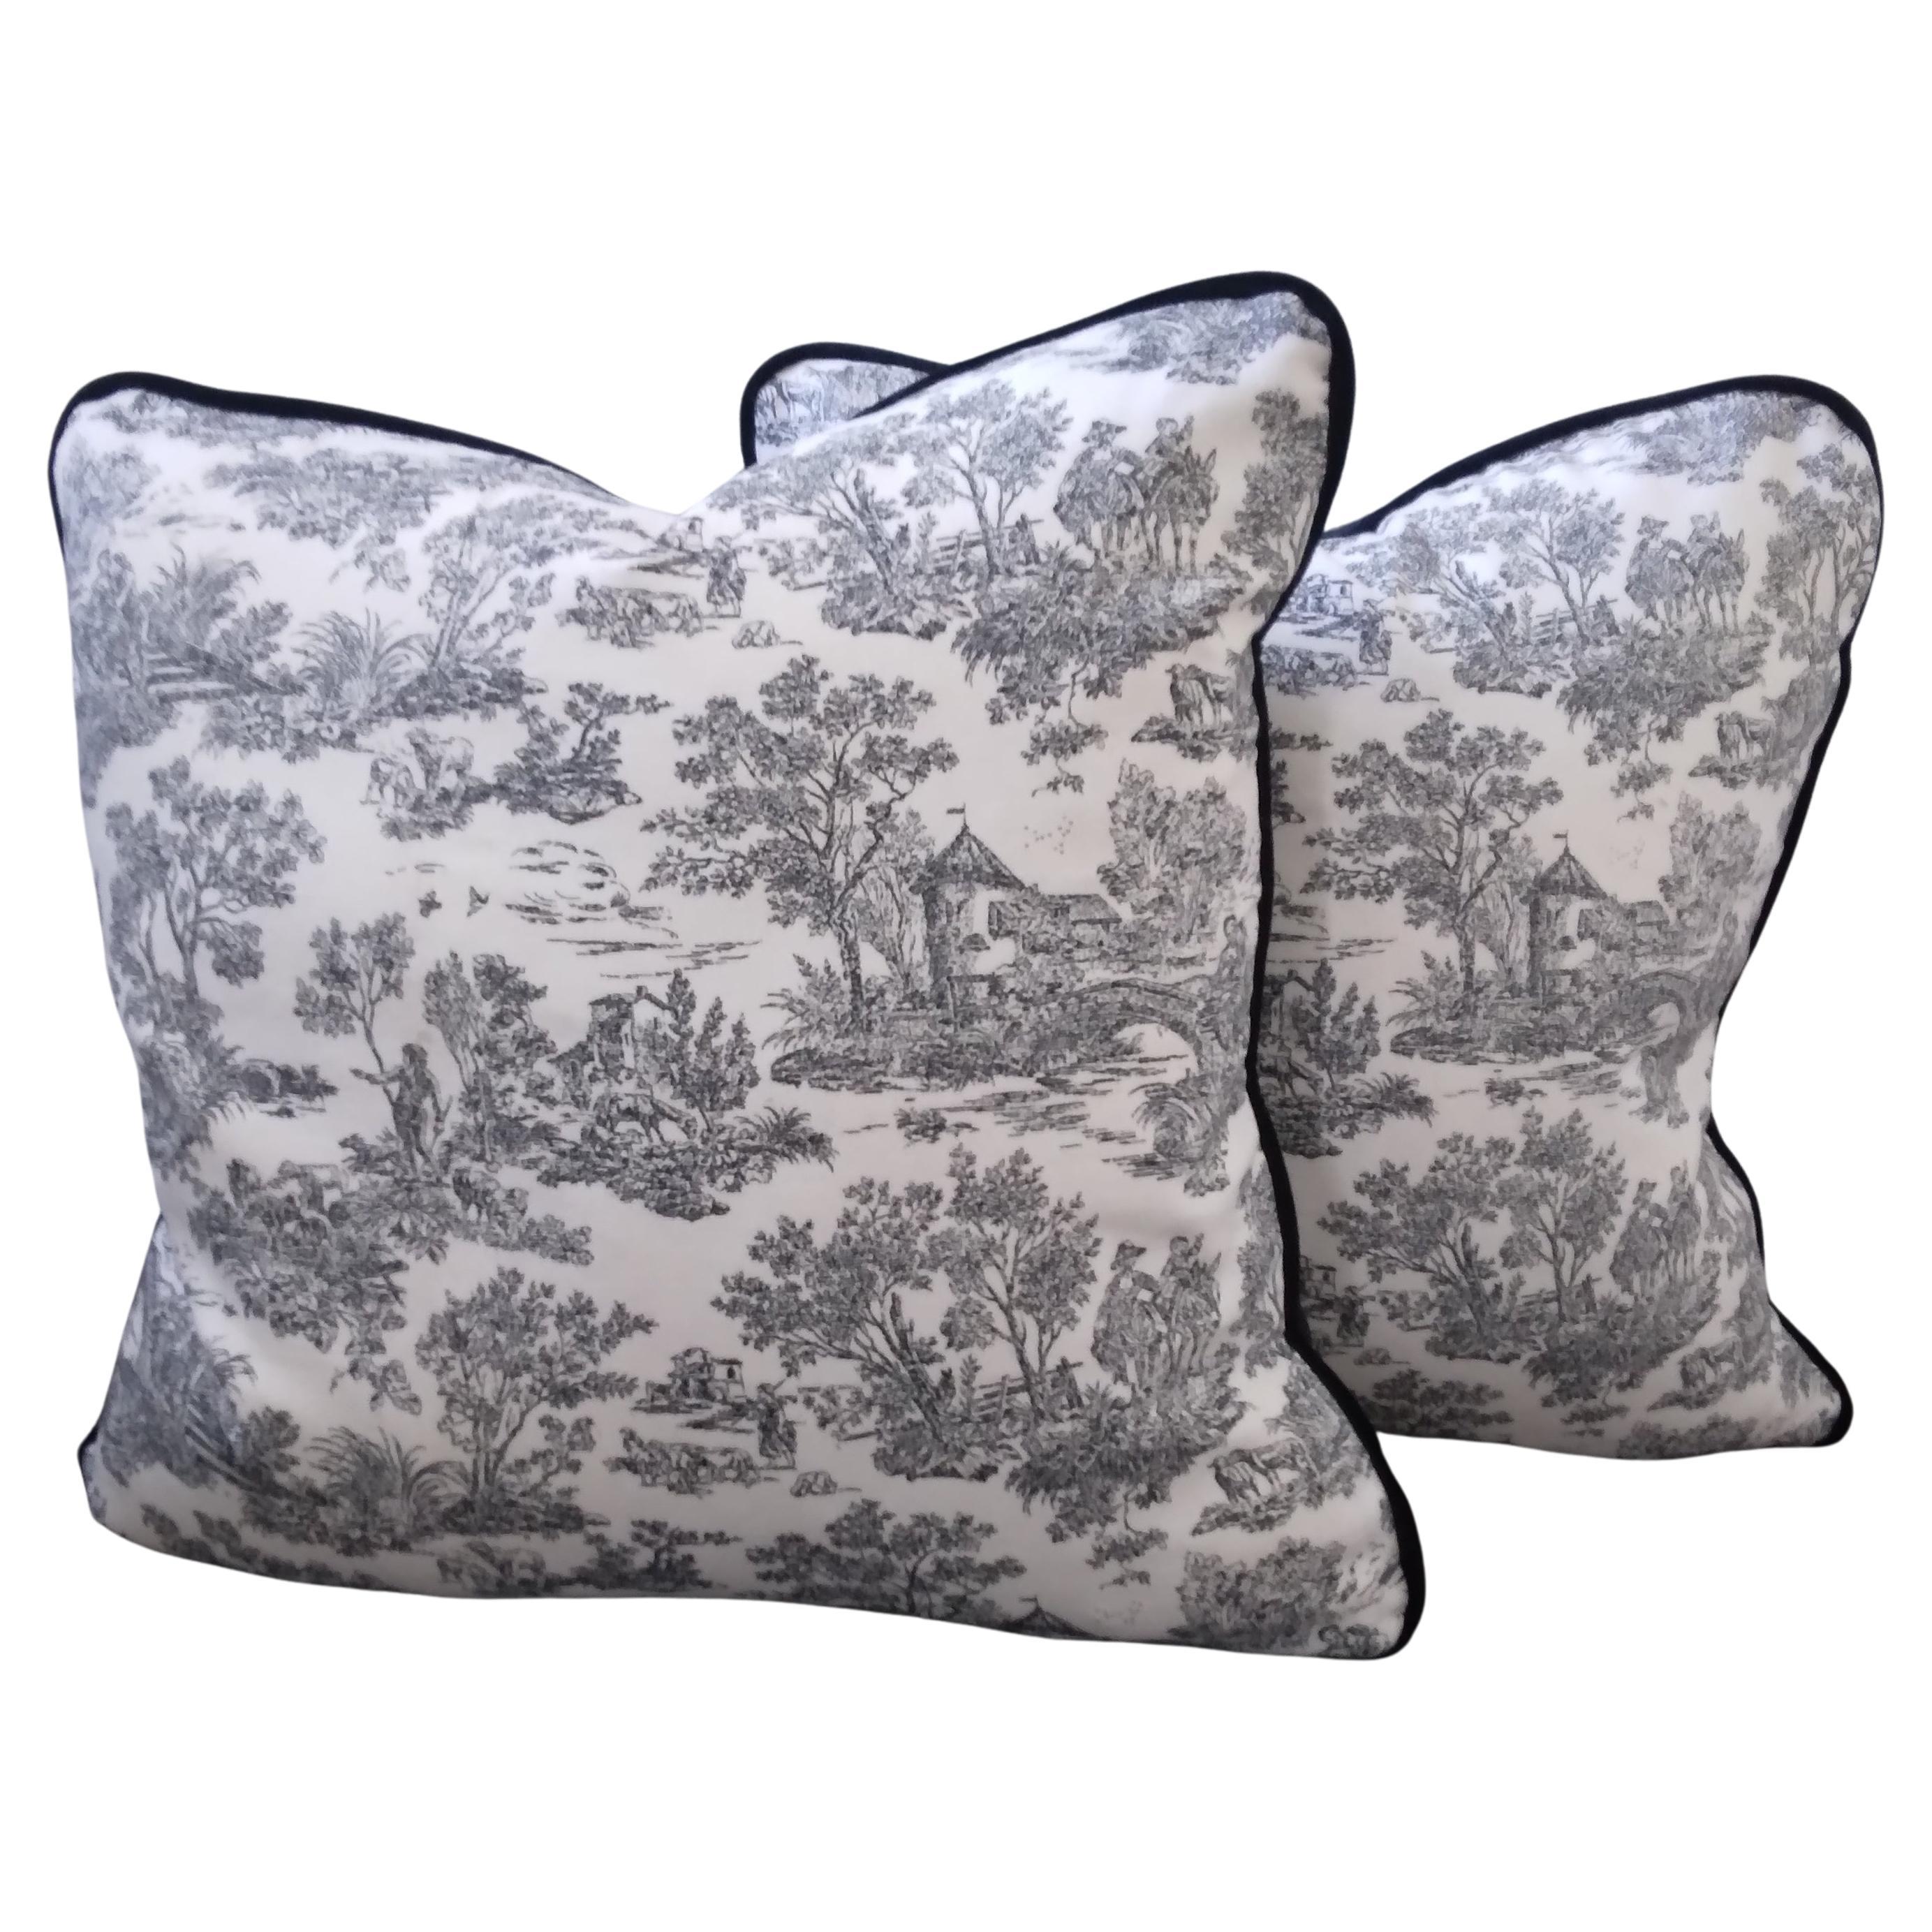 Black and White Toile Print Pillows with Black Velvet Backing - a pair For Sale